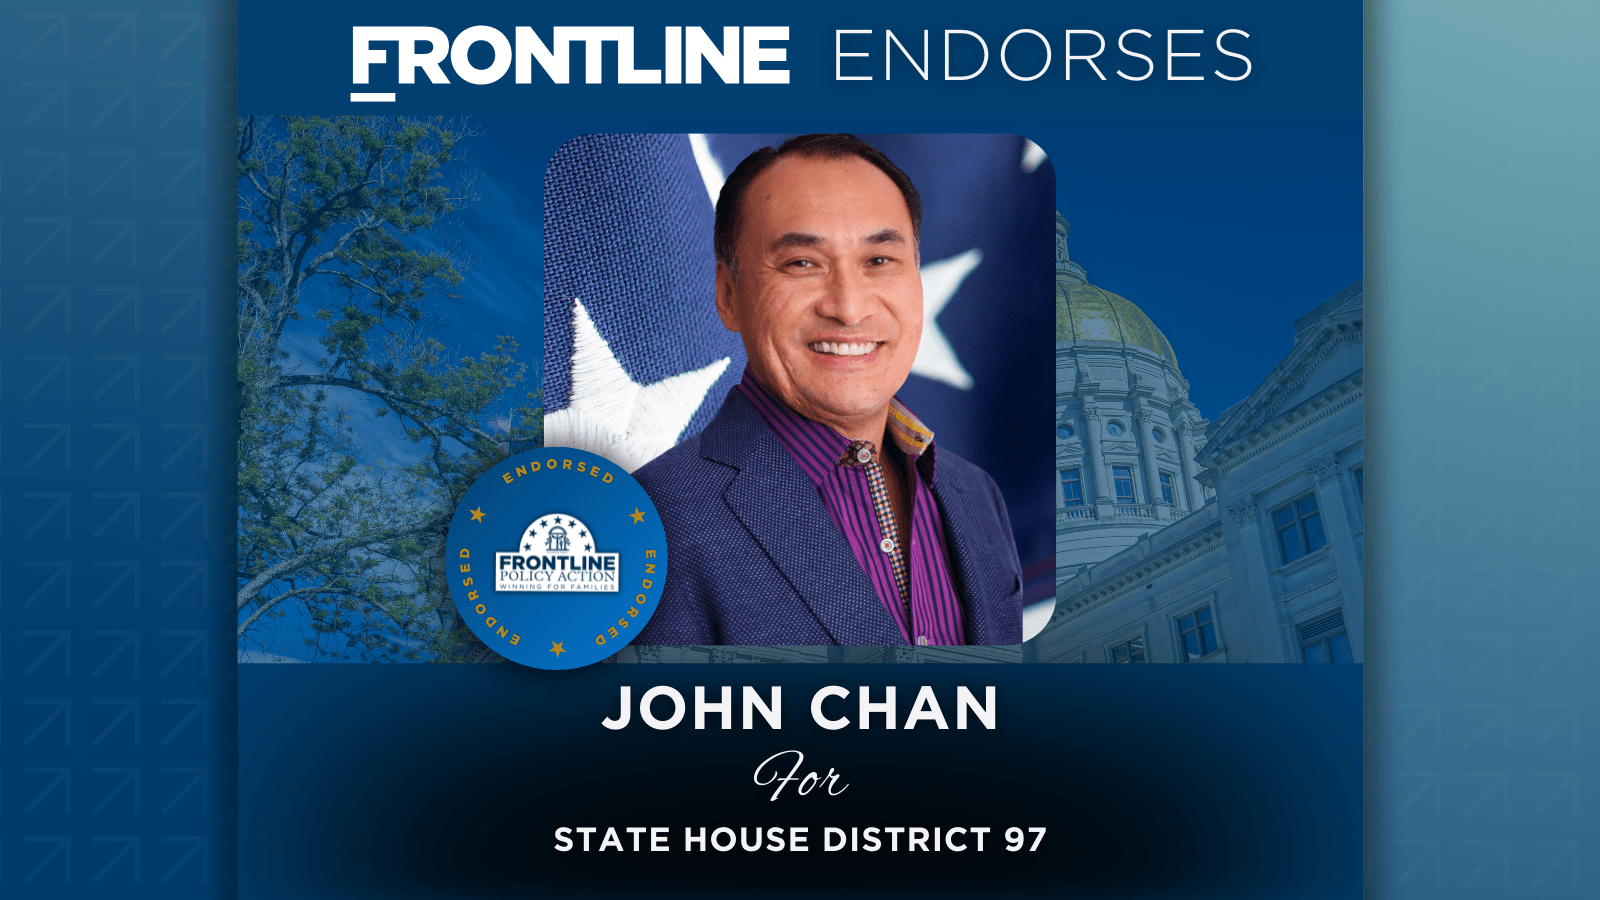 BREAKING: Frontline Endorses John Chan for State House District 97